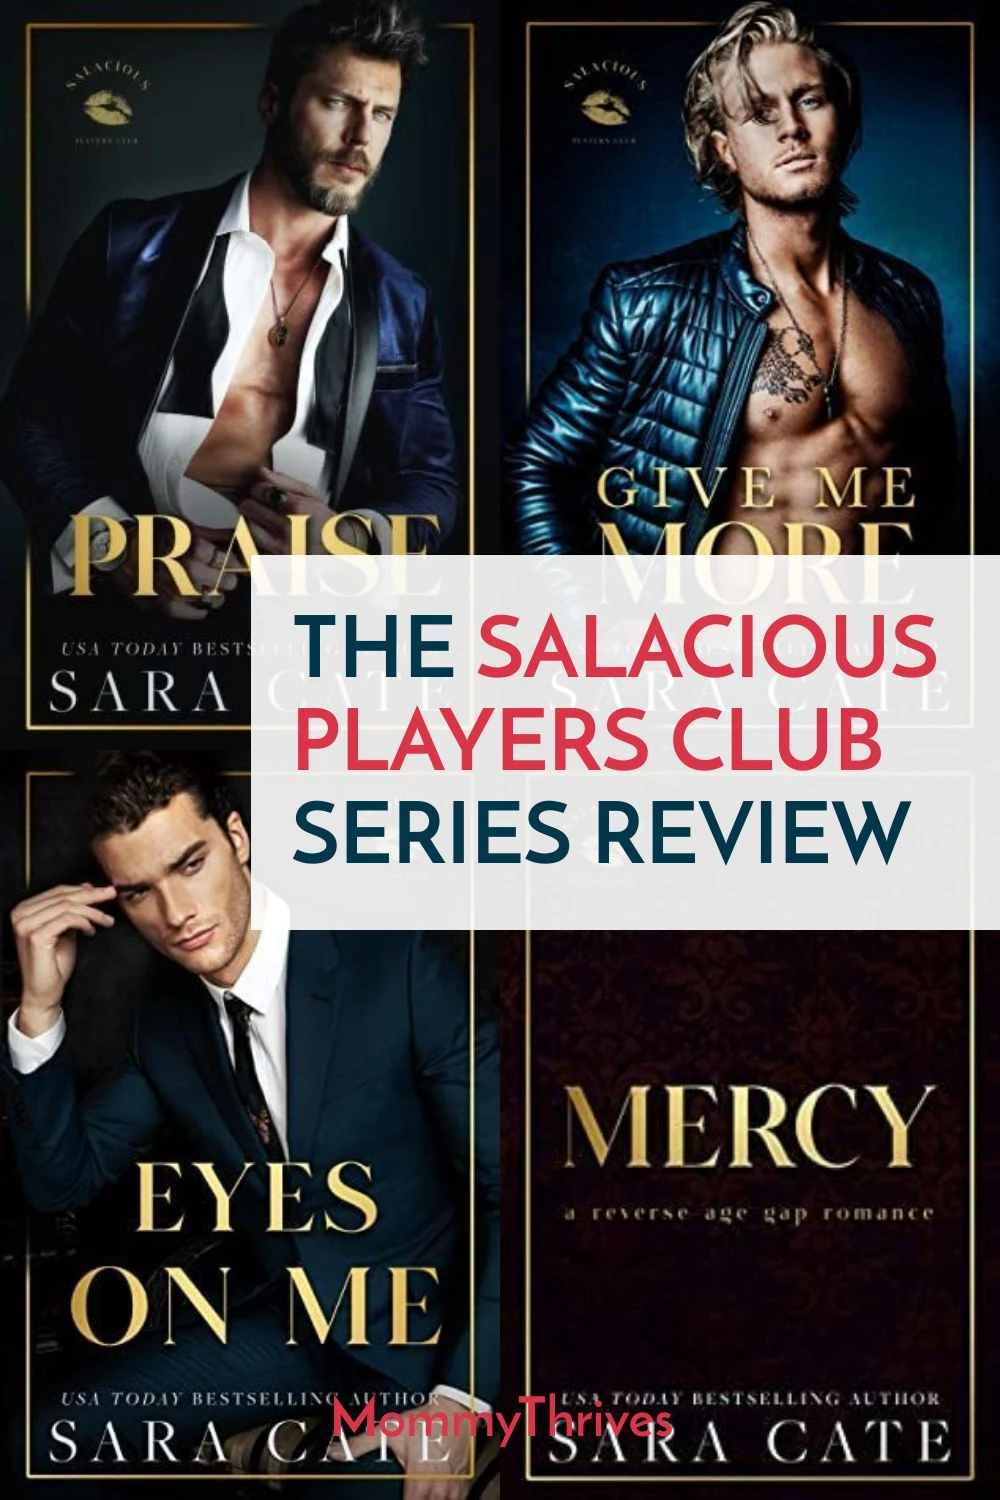 Salacious Players Club Series by Sara Cate Review - Praise, Eyes on Me, Give Me More Book Reviews - Spicy Book Reviews